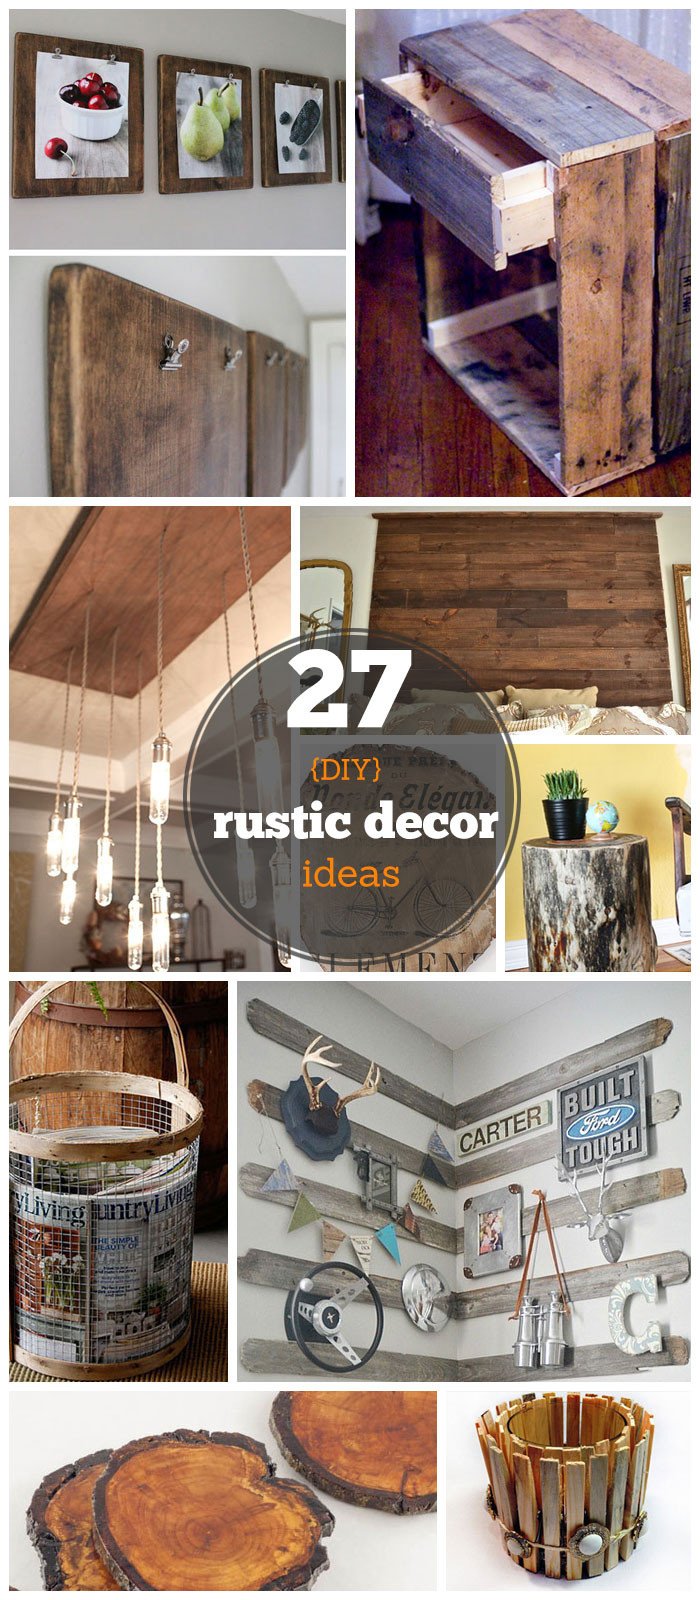 27 DIY Rustic Decor Ideas for the Home